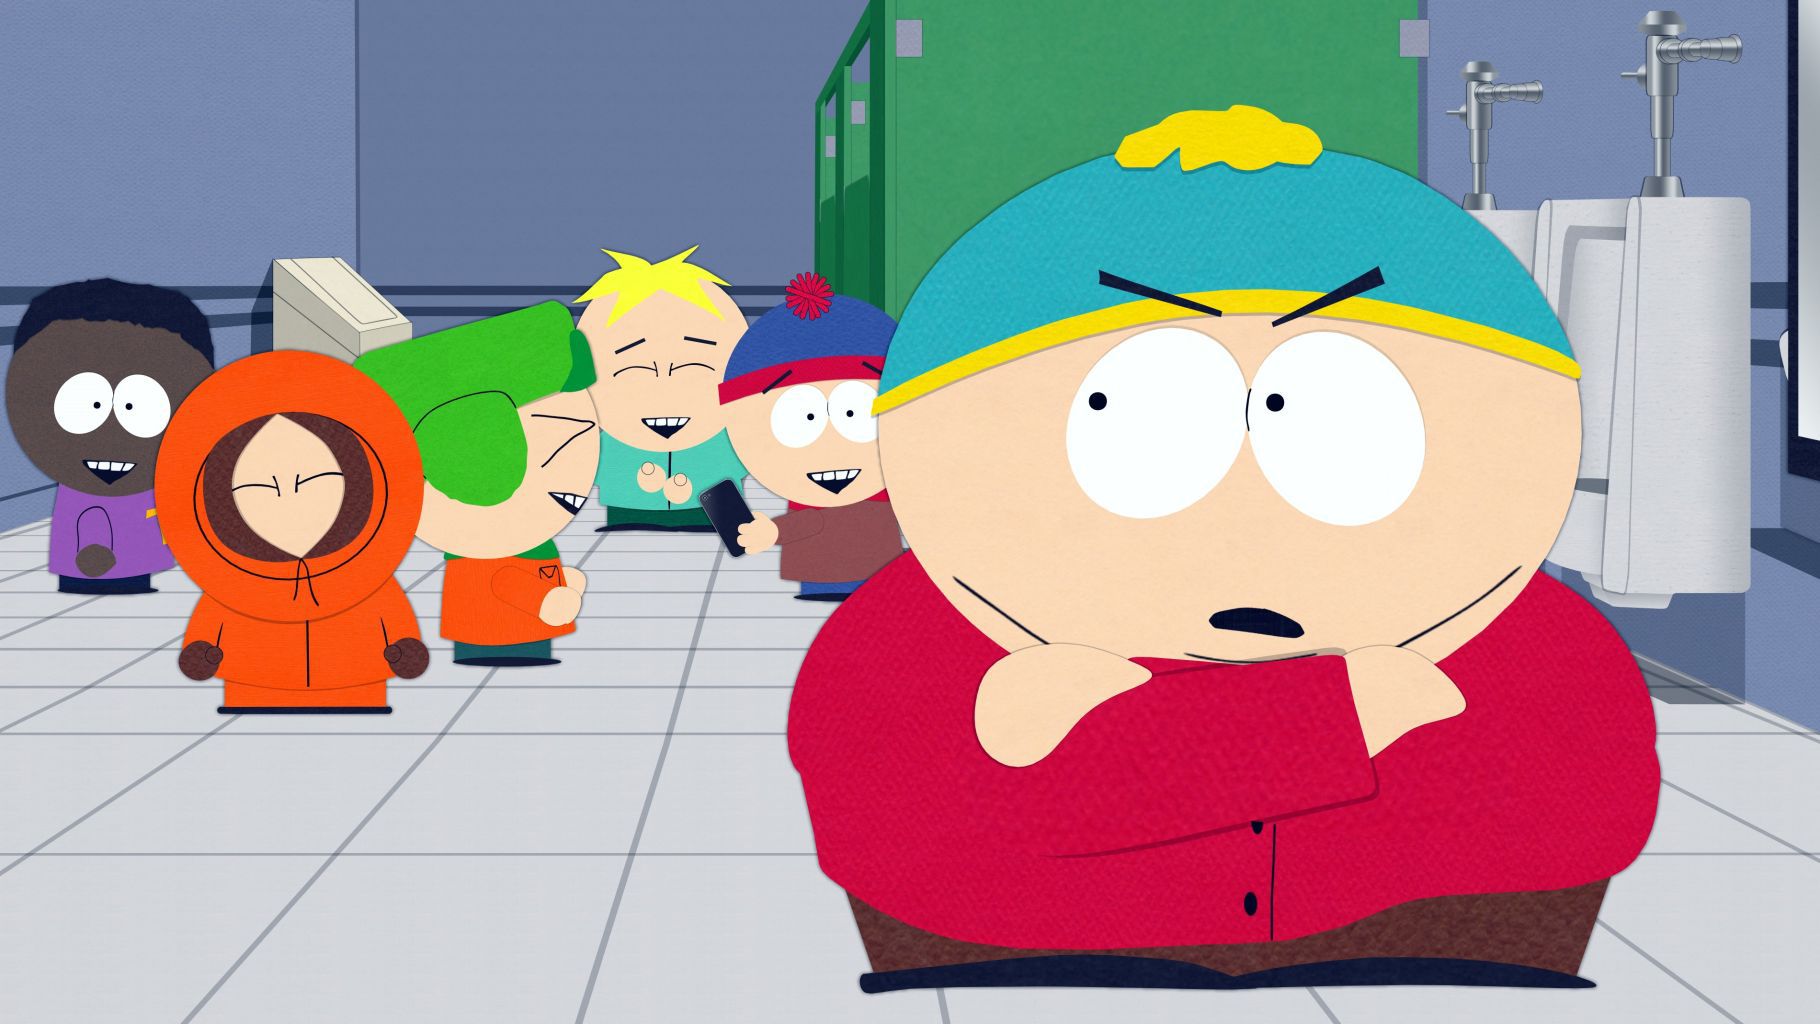 southparkpresssite2 Recapping South Park: Put It Down Reminds Us of Americas Most Dangerous Threat